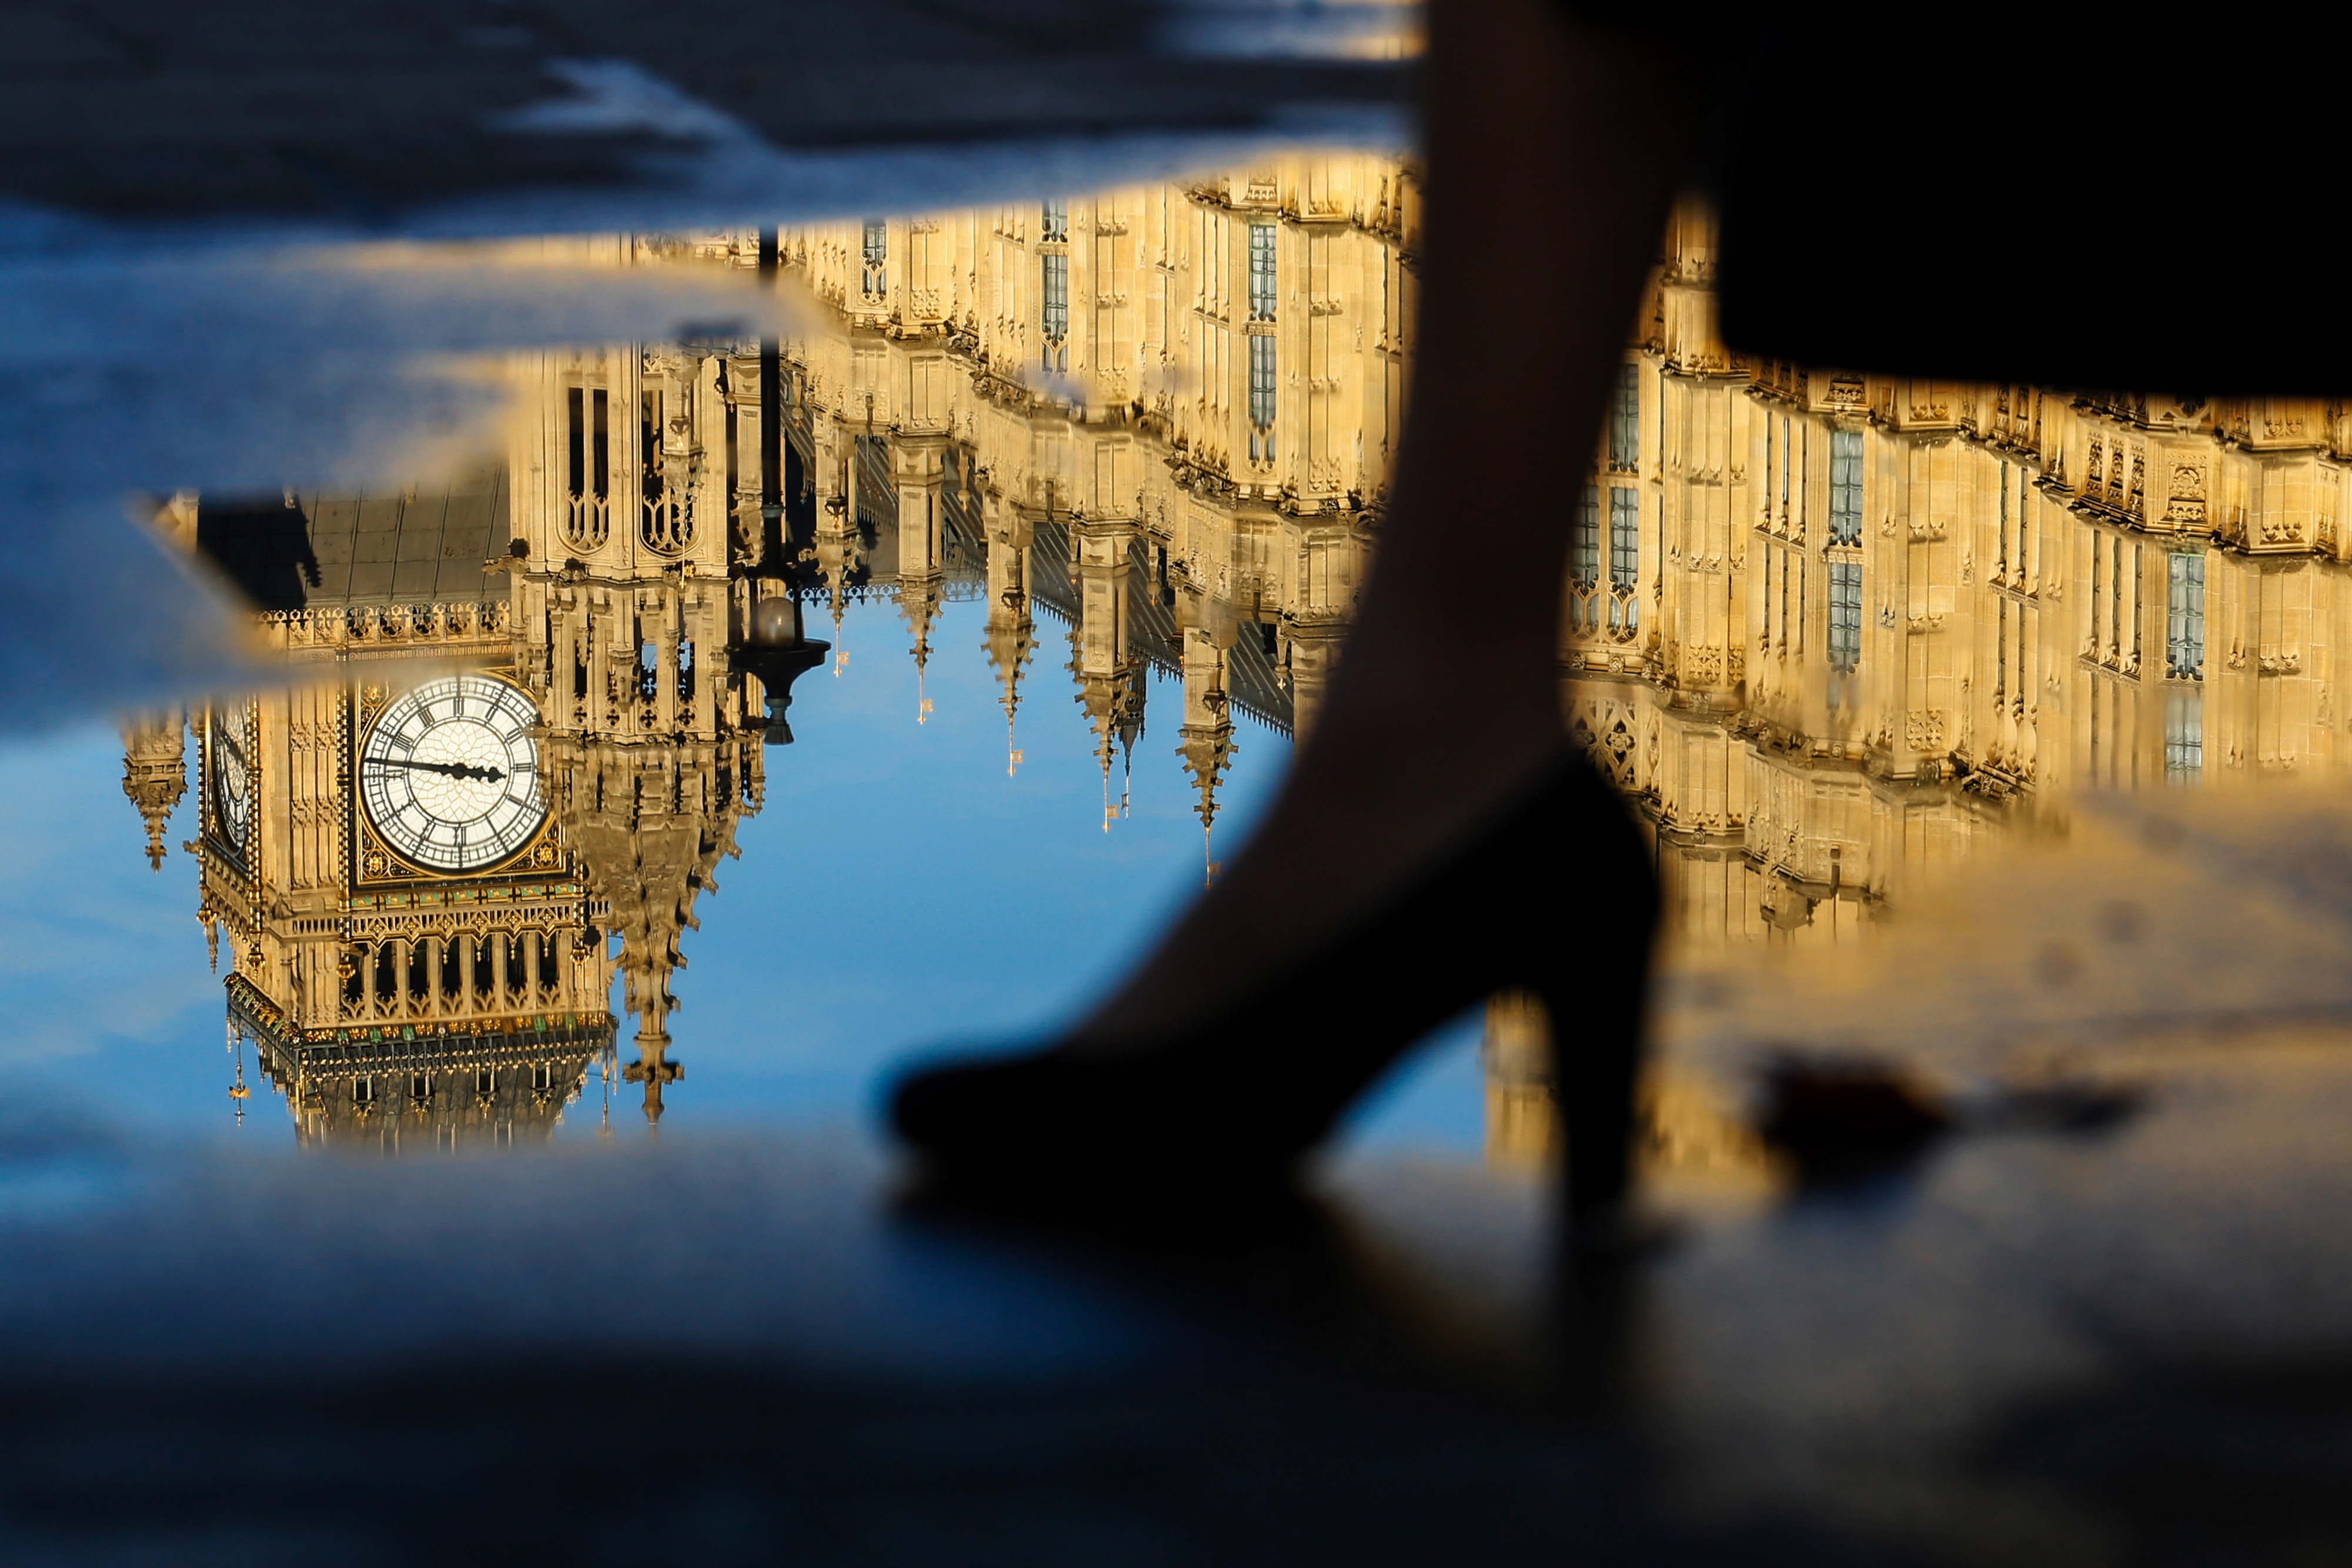 A woman passes a puddle reflecting Elizabeth Tower, commonly referred to as Big Ben, and Houses of Parliament in London, U.K. on Tuesday Jan. 17, 2017. (Luke MacGregor—Bloomberg via Getty Images)